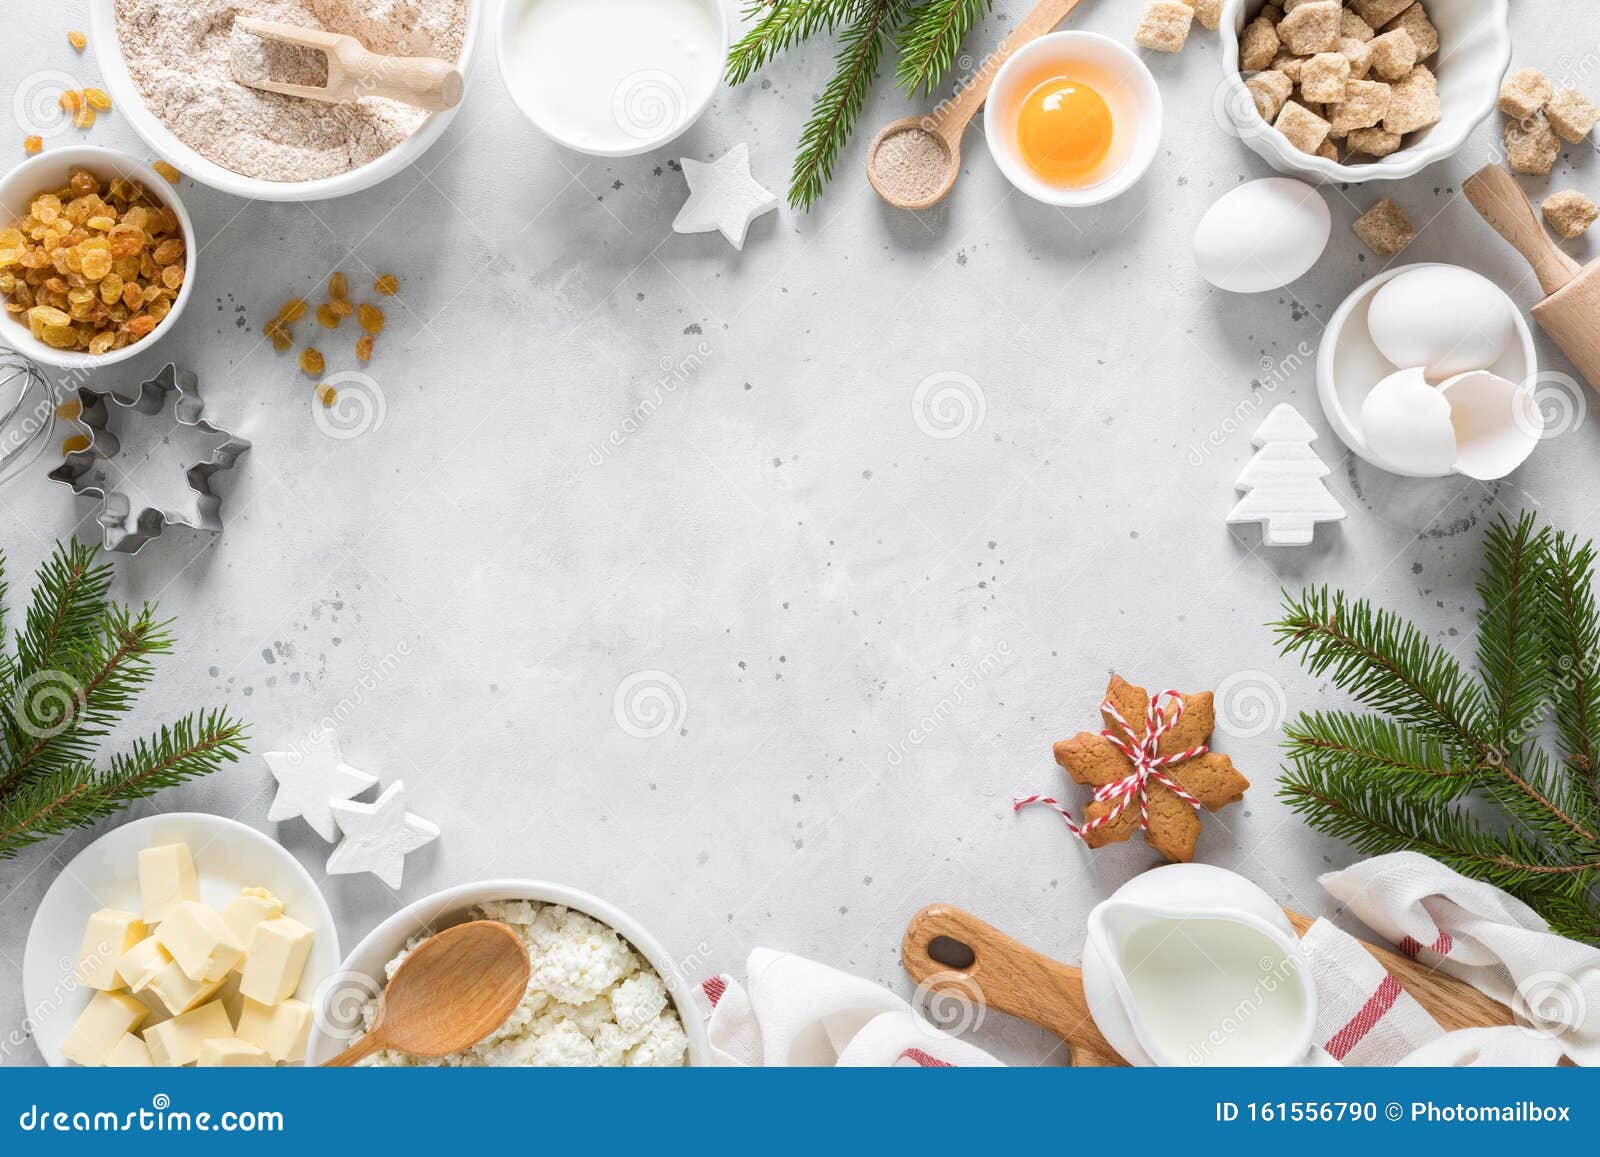 https://thumbs.dreamstime.com/z/christmas-xmas-baking-culinary-background-ingredients-cooking-pastry-kitchen-table-recipe-new-year-mas-noel-holiday-161556790.jpg